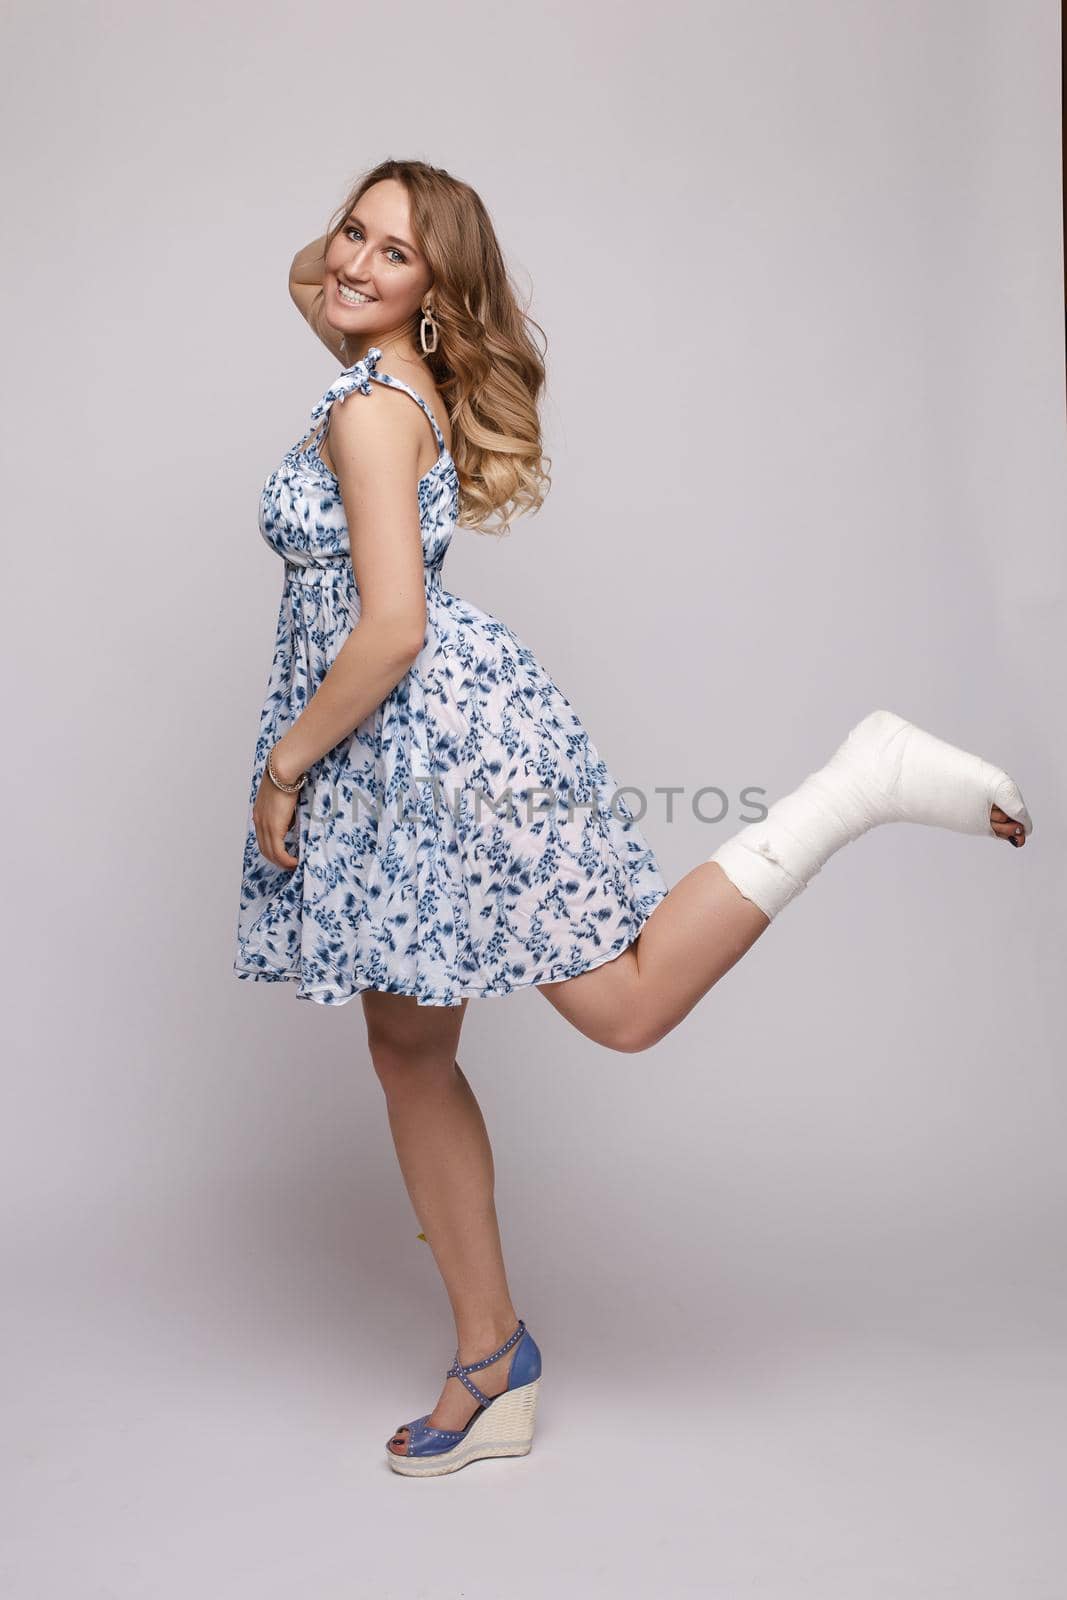 Side view of pretty woman in short dress posing with broked leg on isolated background. Happy confident model with fracture looking at camera and laughing. Concept of happiness and inquiry.